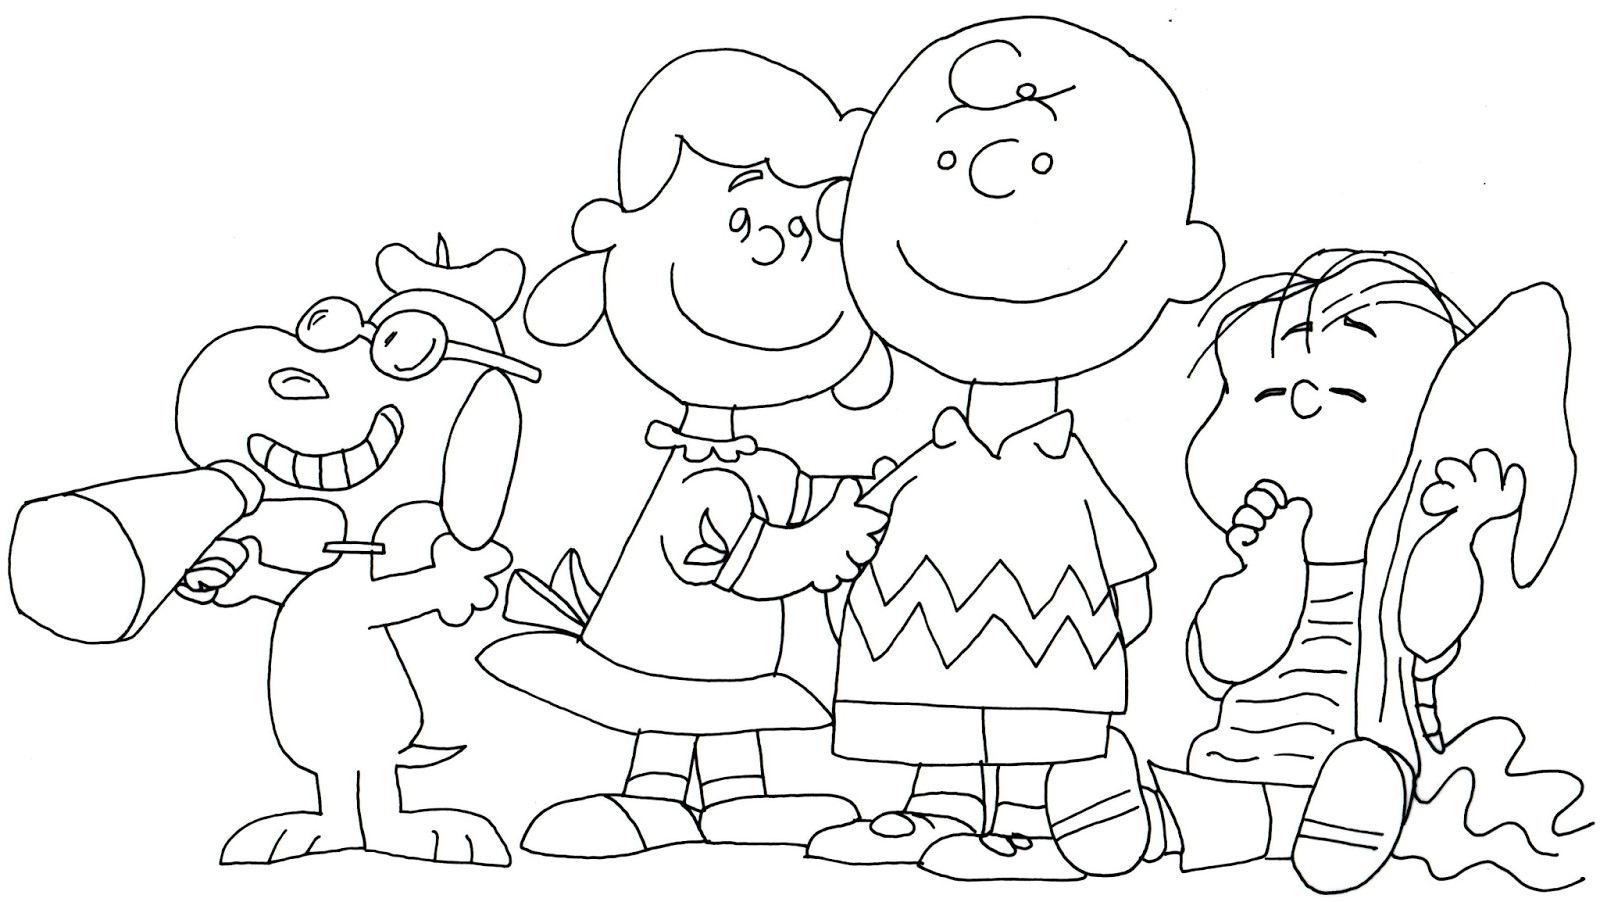 Snoopy Printable Coloring Pages at GetColorings.com | Free printable ...